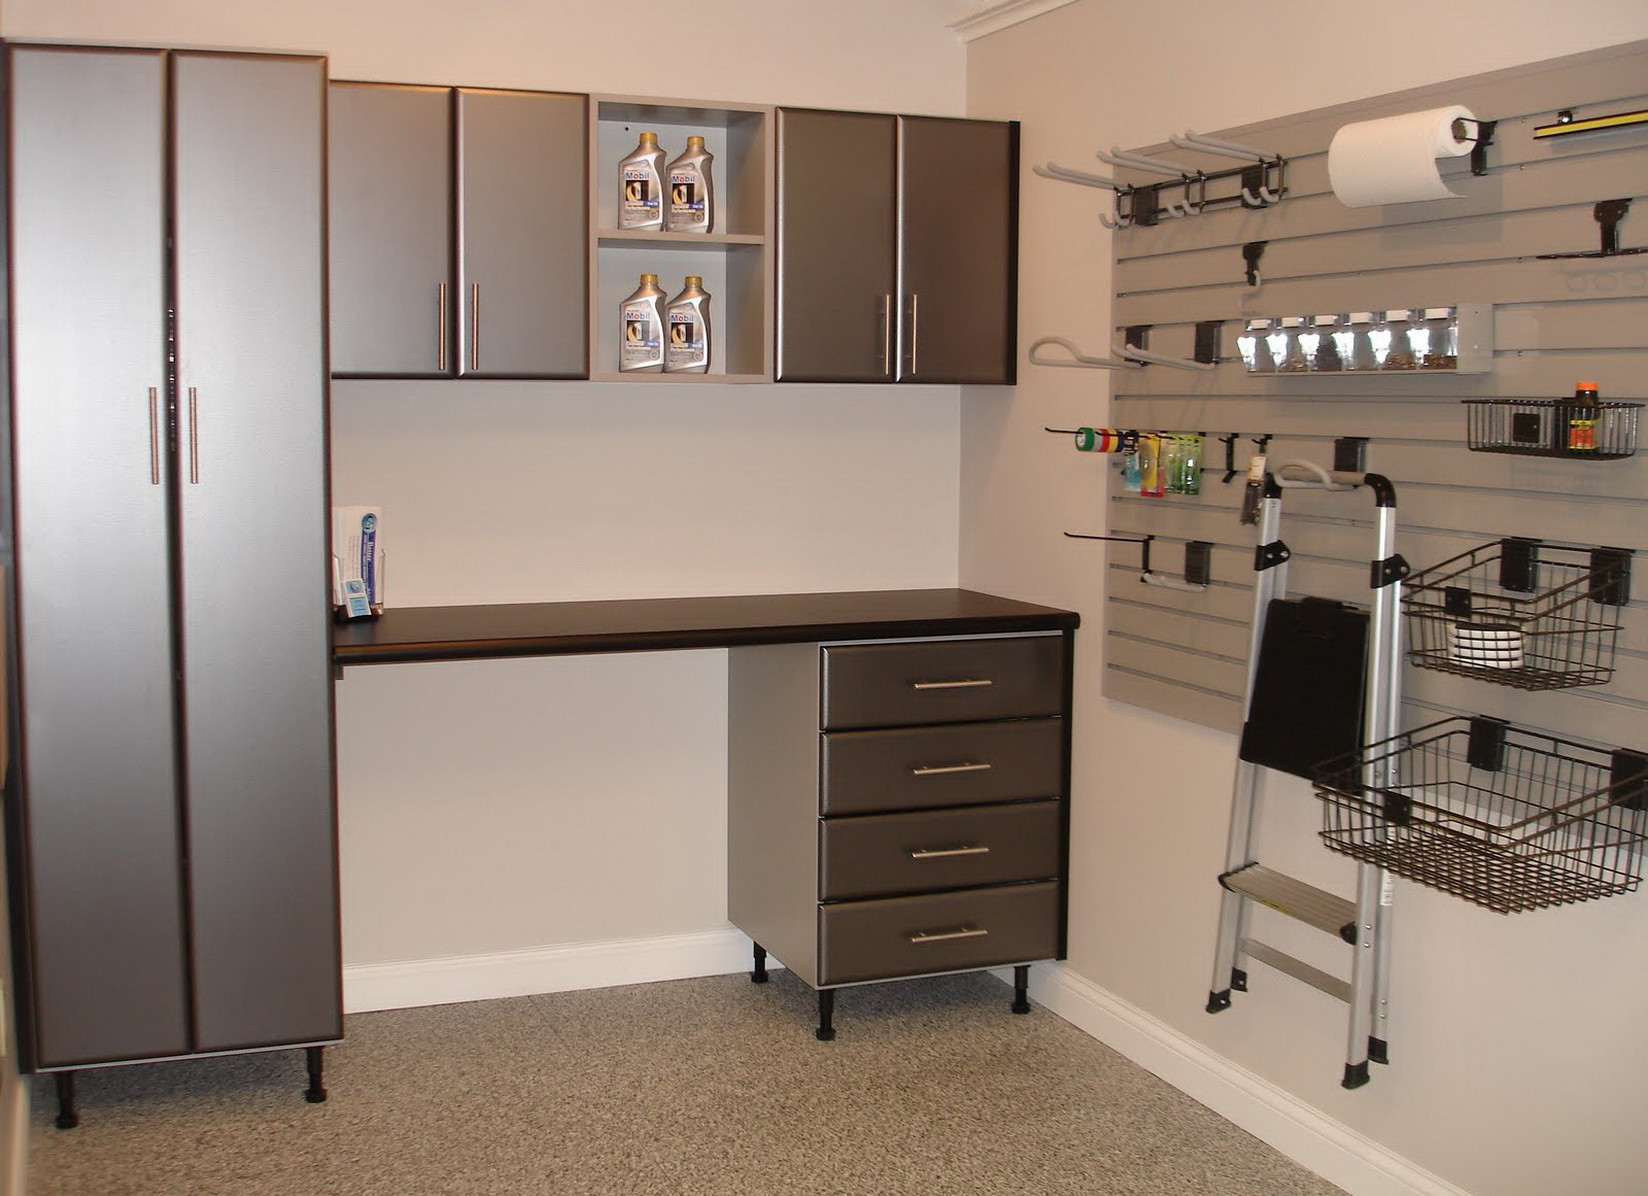 Garage Organizing Cabinets
 Garage Storage Ideas for More Organized Solutions of